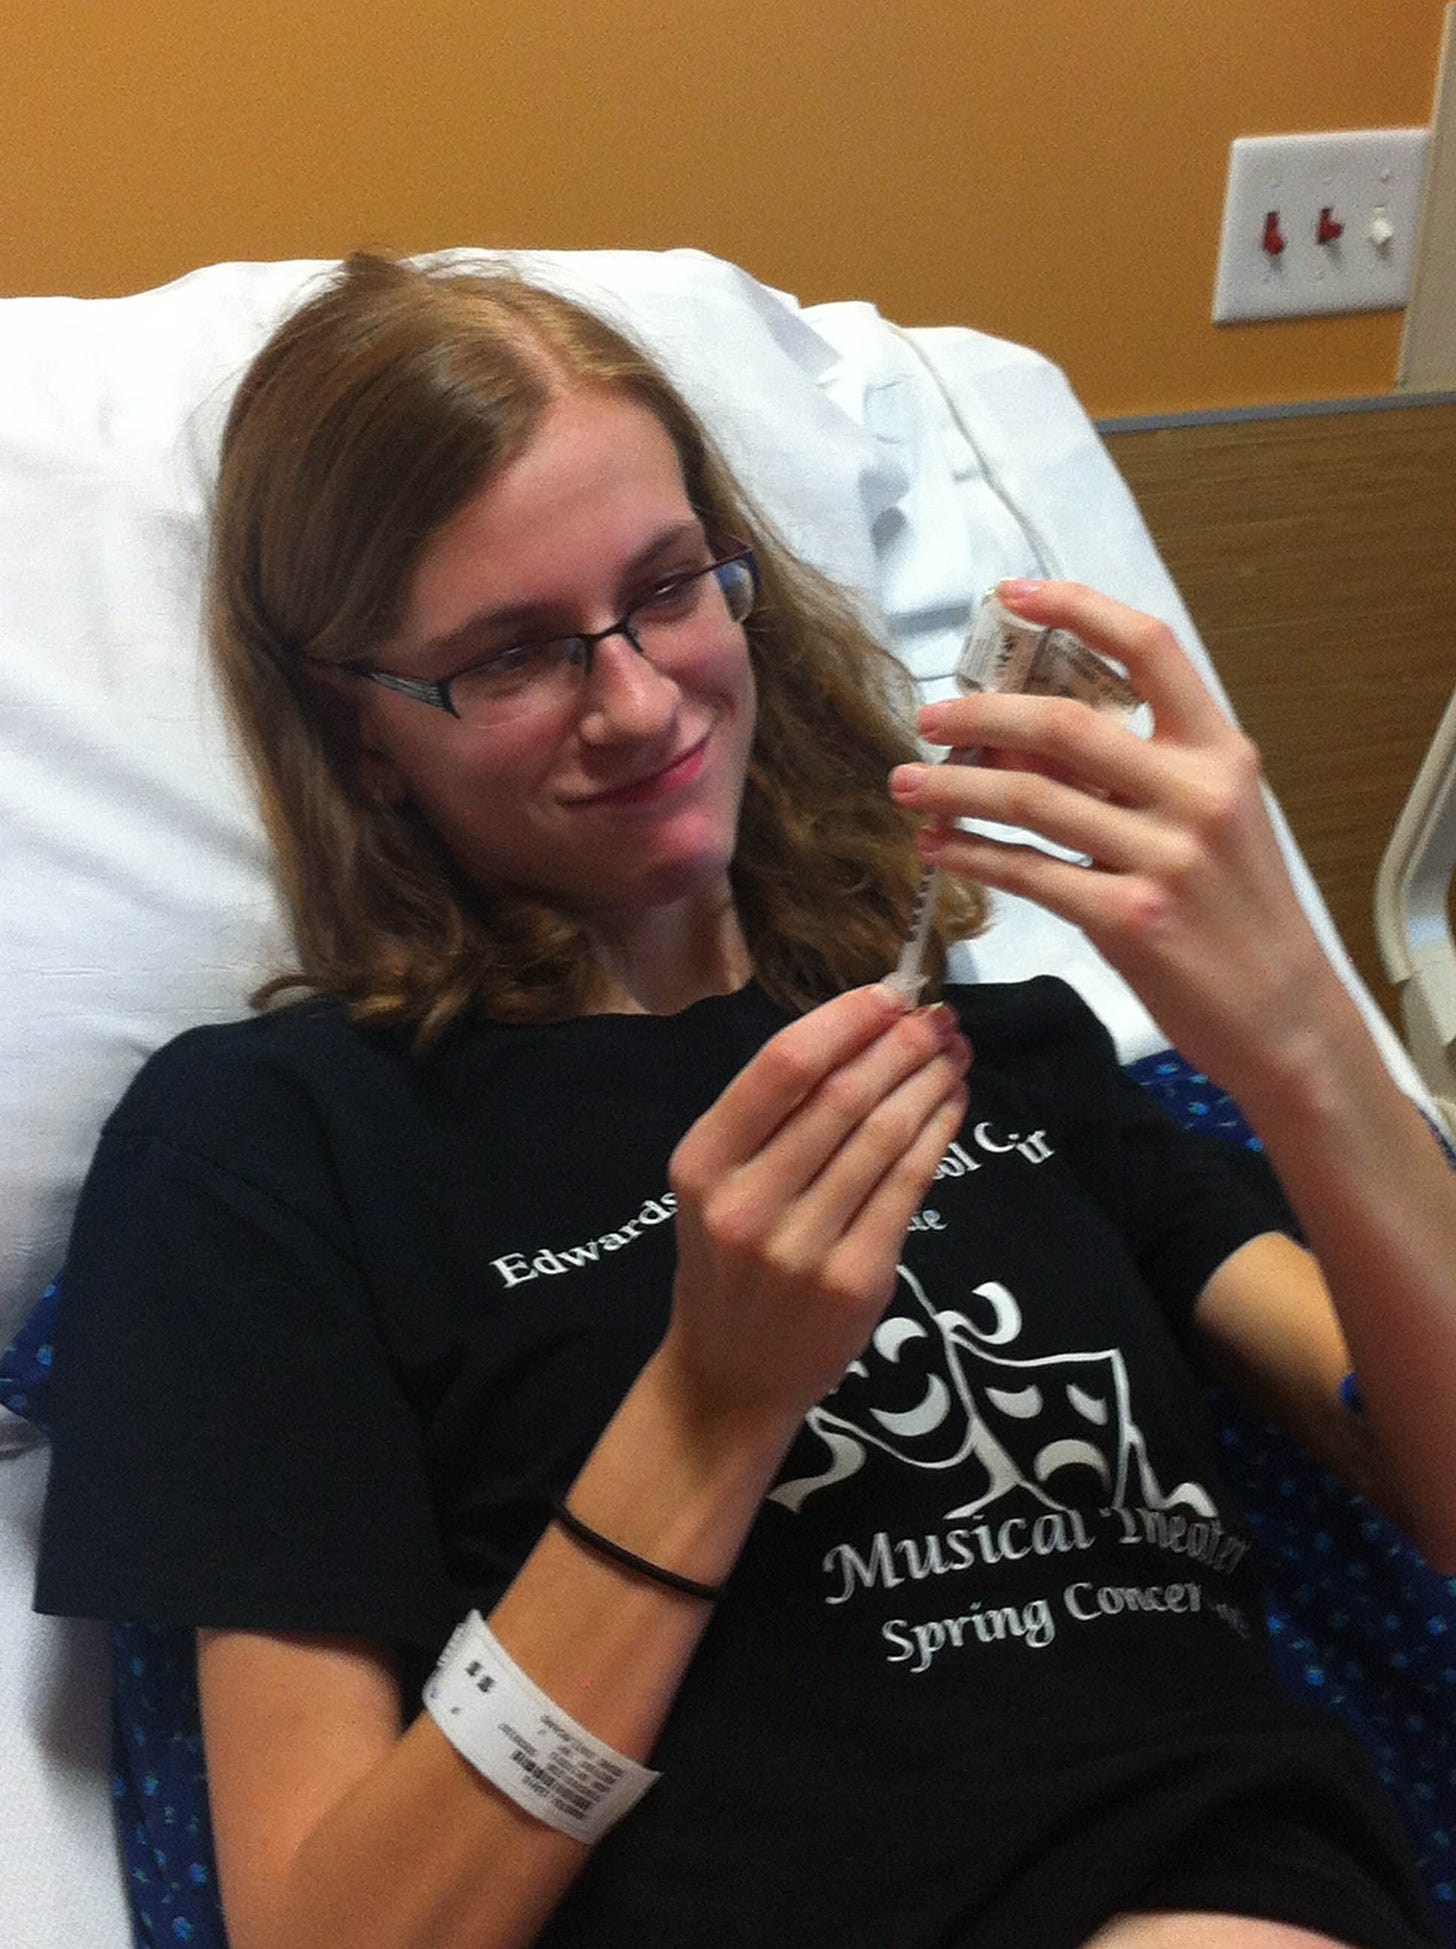 Young, thin girl in hospital bed, drawing insulin from bottle with syringe.